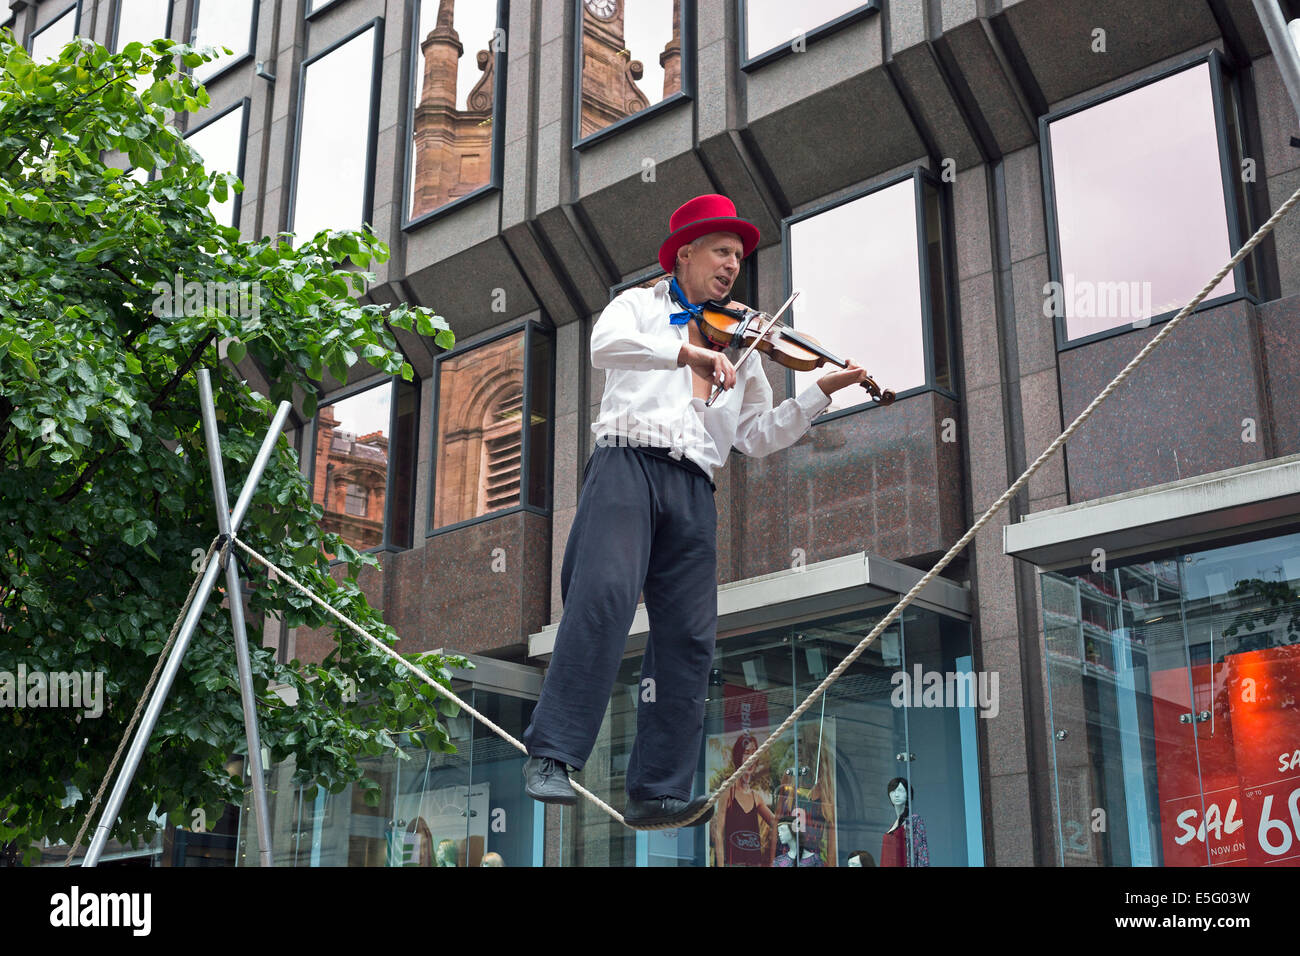 Street busker playing a violin while performing on a trapeze, Buchanan Street, Glasgow, UK Stock Photo